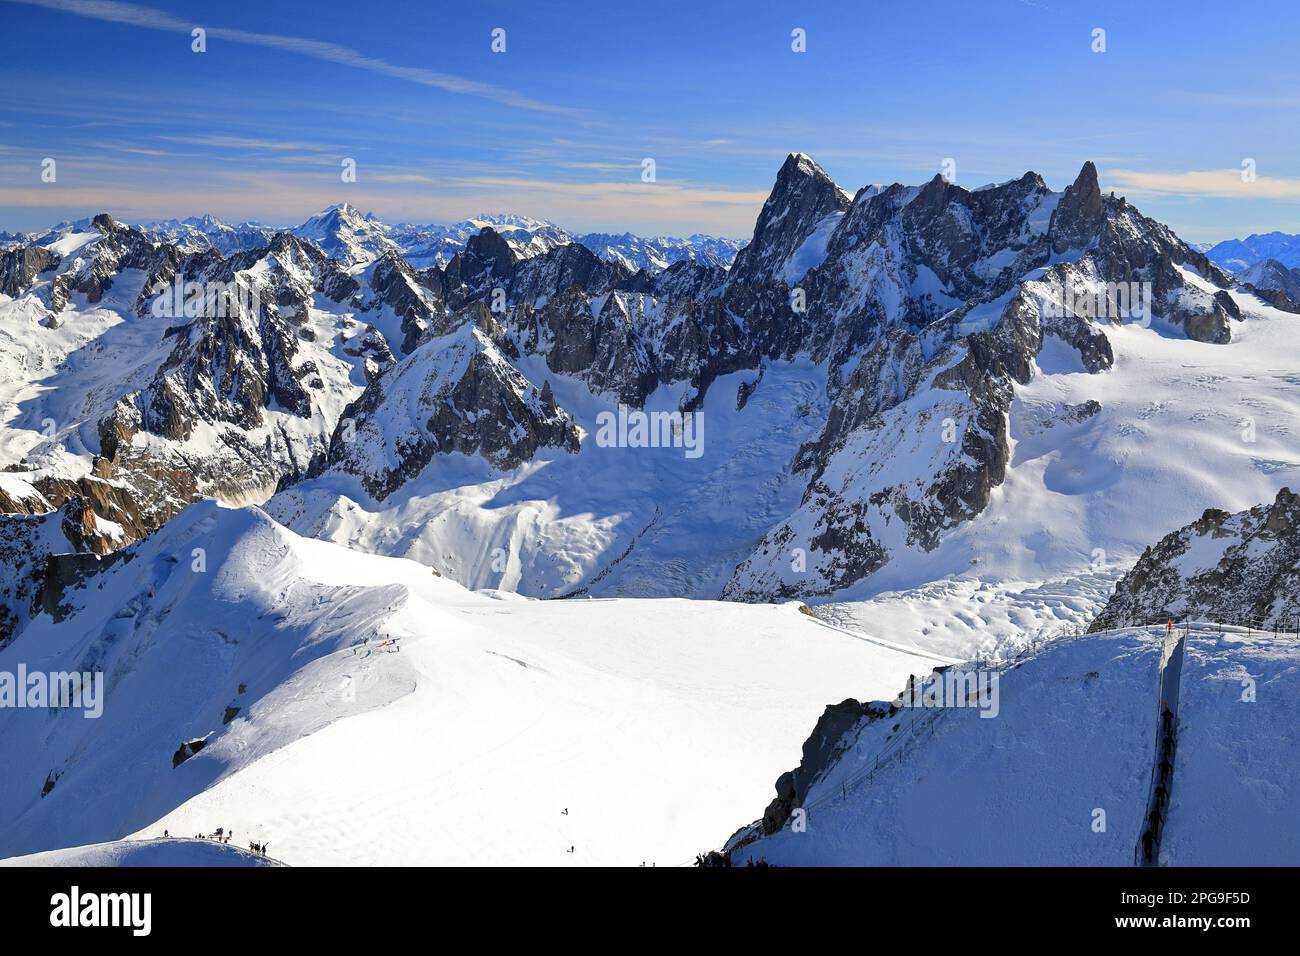 View of the glacier valley of the Mont Blanc massif seen from the Aiguille du Midi. French Alps, Europe. Stock Photo